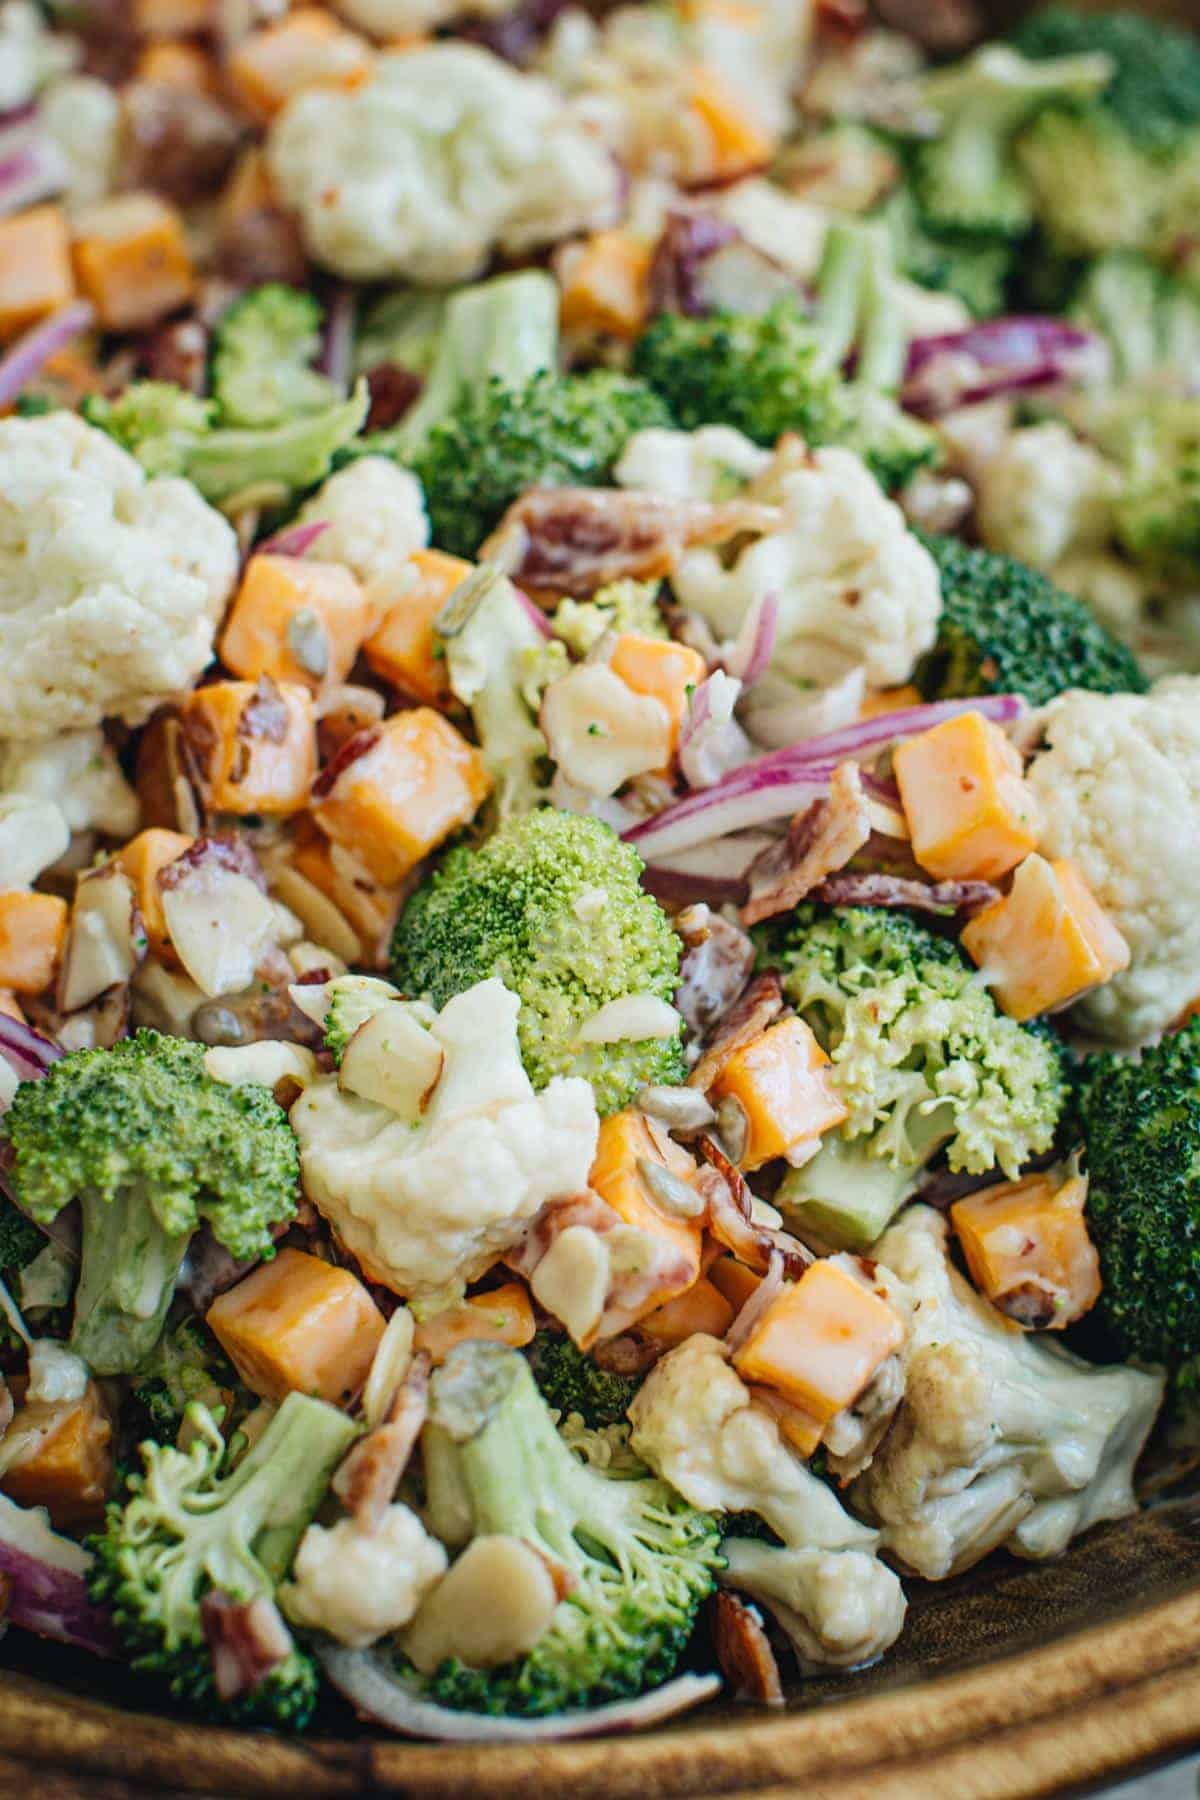 Broccoli cauliflower salad with a mayonnaise dressing in a wooden bowl.